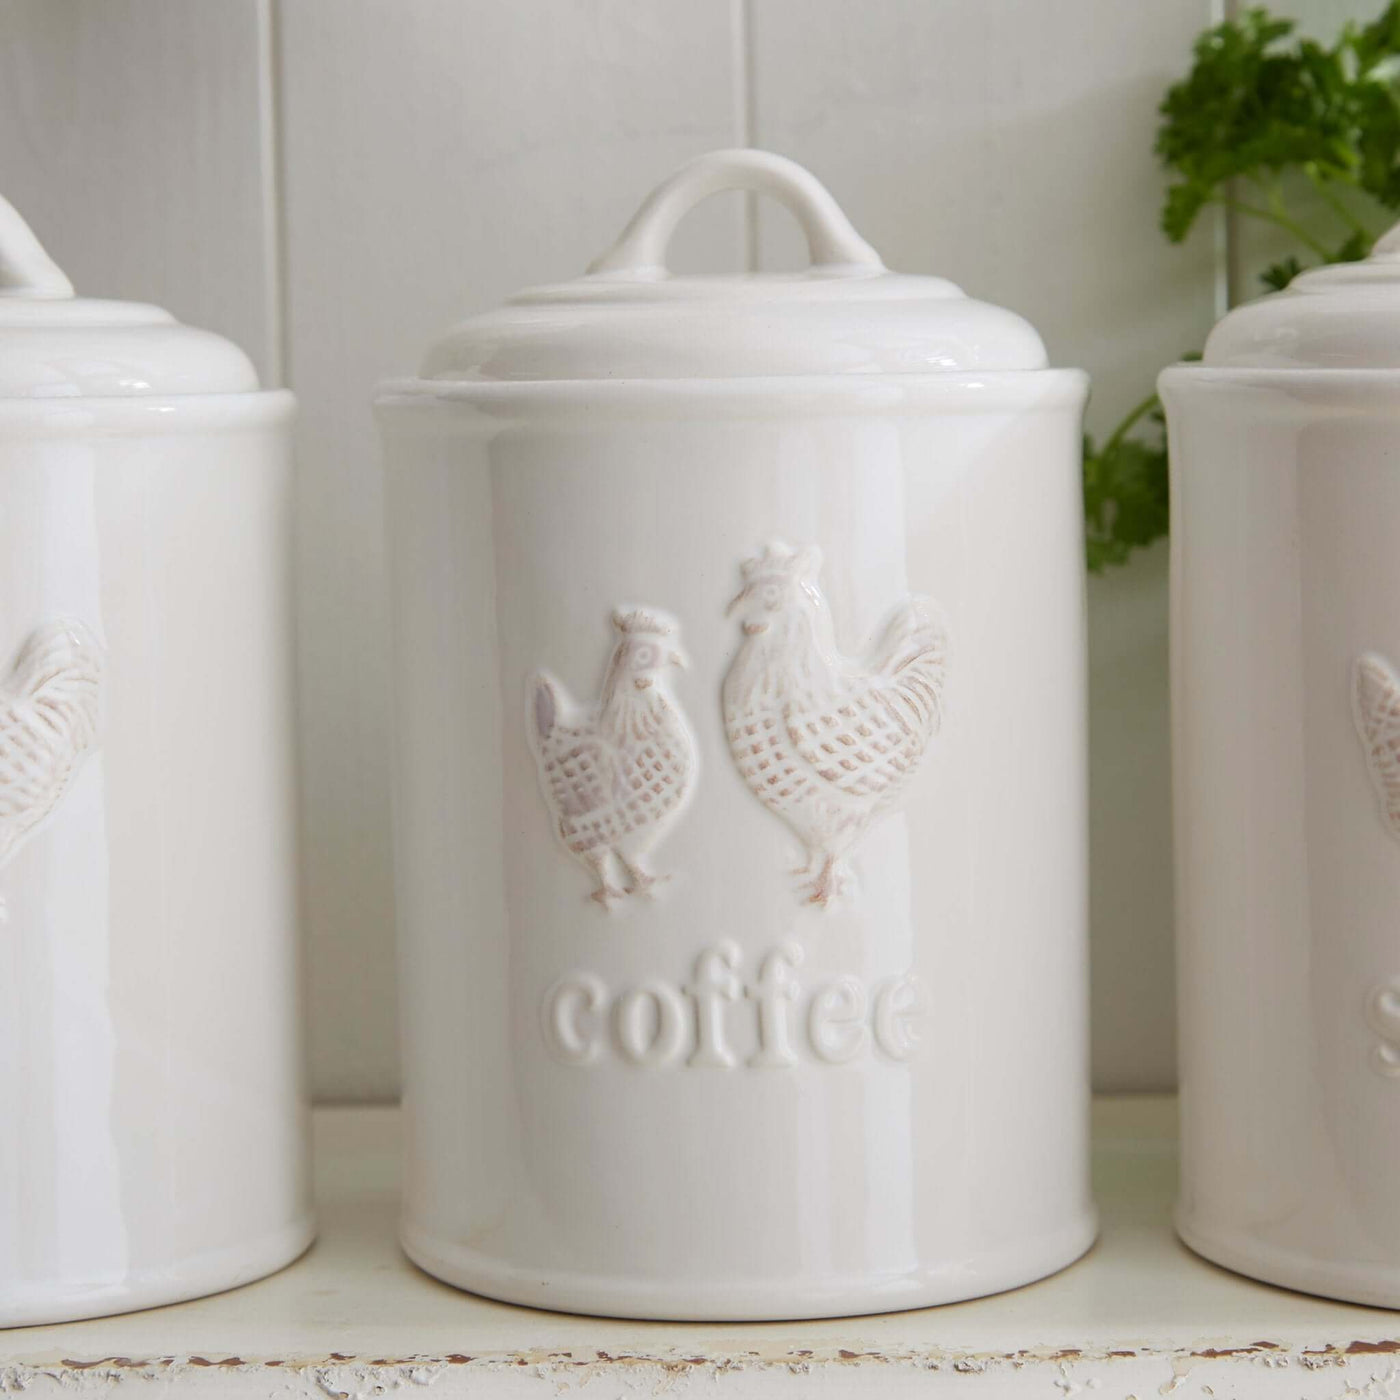 White Ceramic "Coffee" Canister with Cockerel Detail - LIVE LAUGH LOVE LIMITED